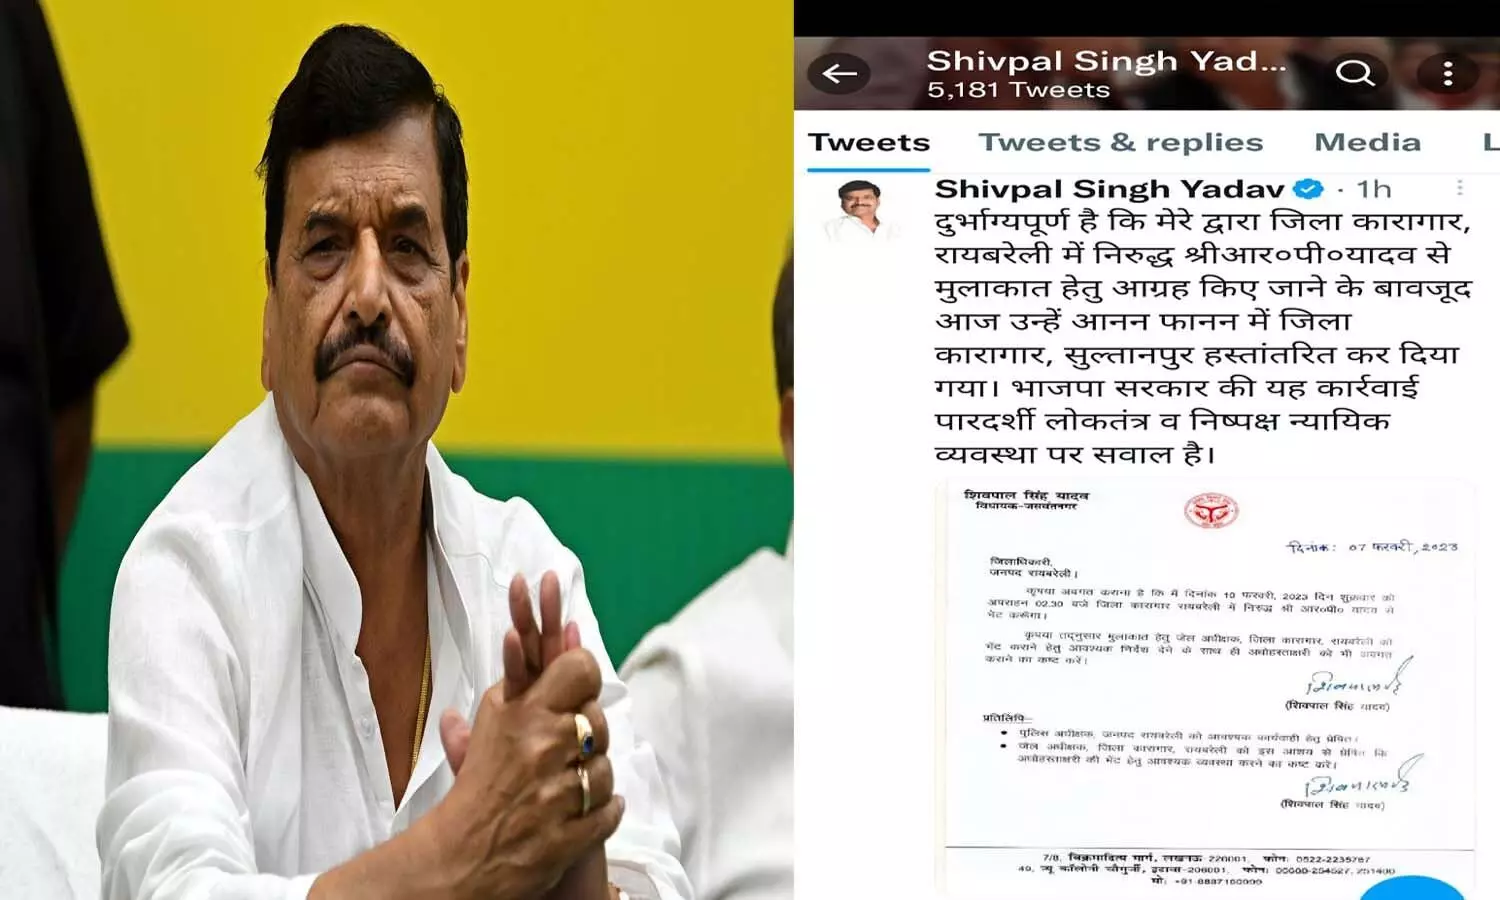 Jailed SP leader RP Yadav was shifted to Sultanpur Jail, Shivpal Yadav tweeted that it was unfortunate